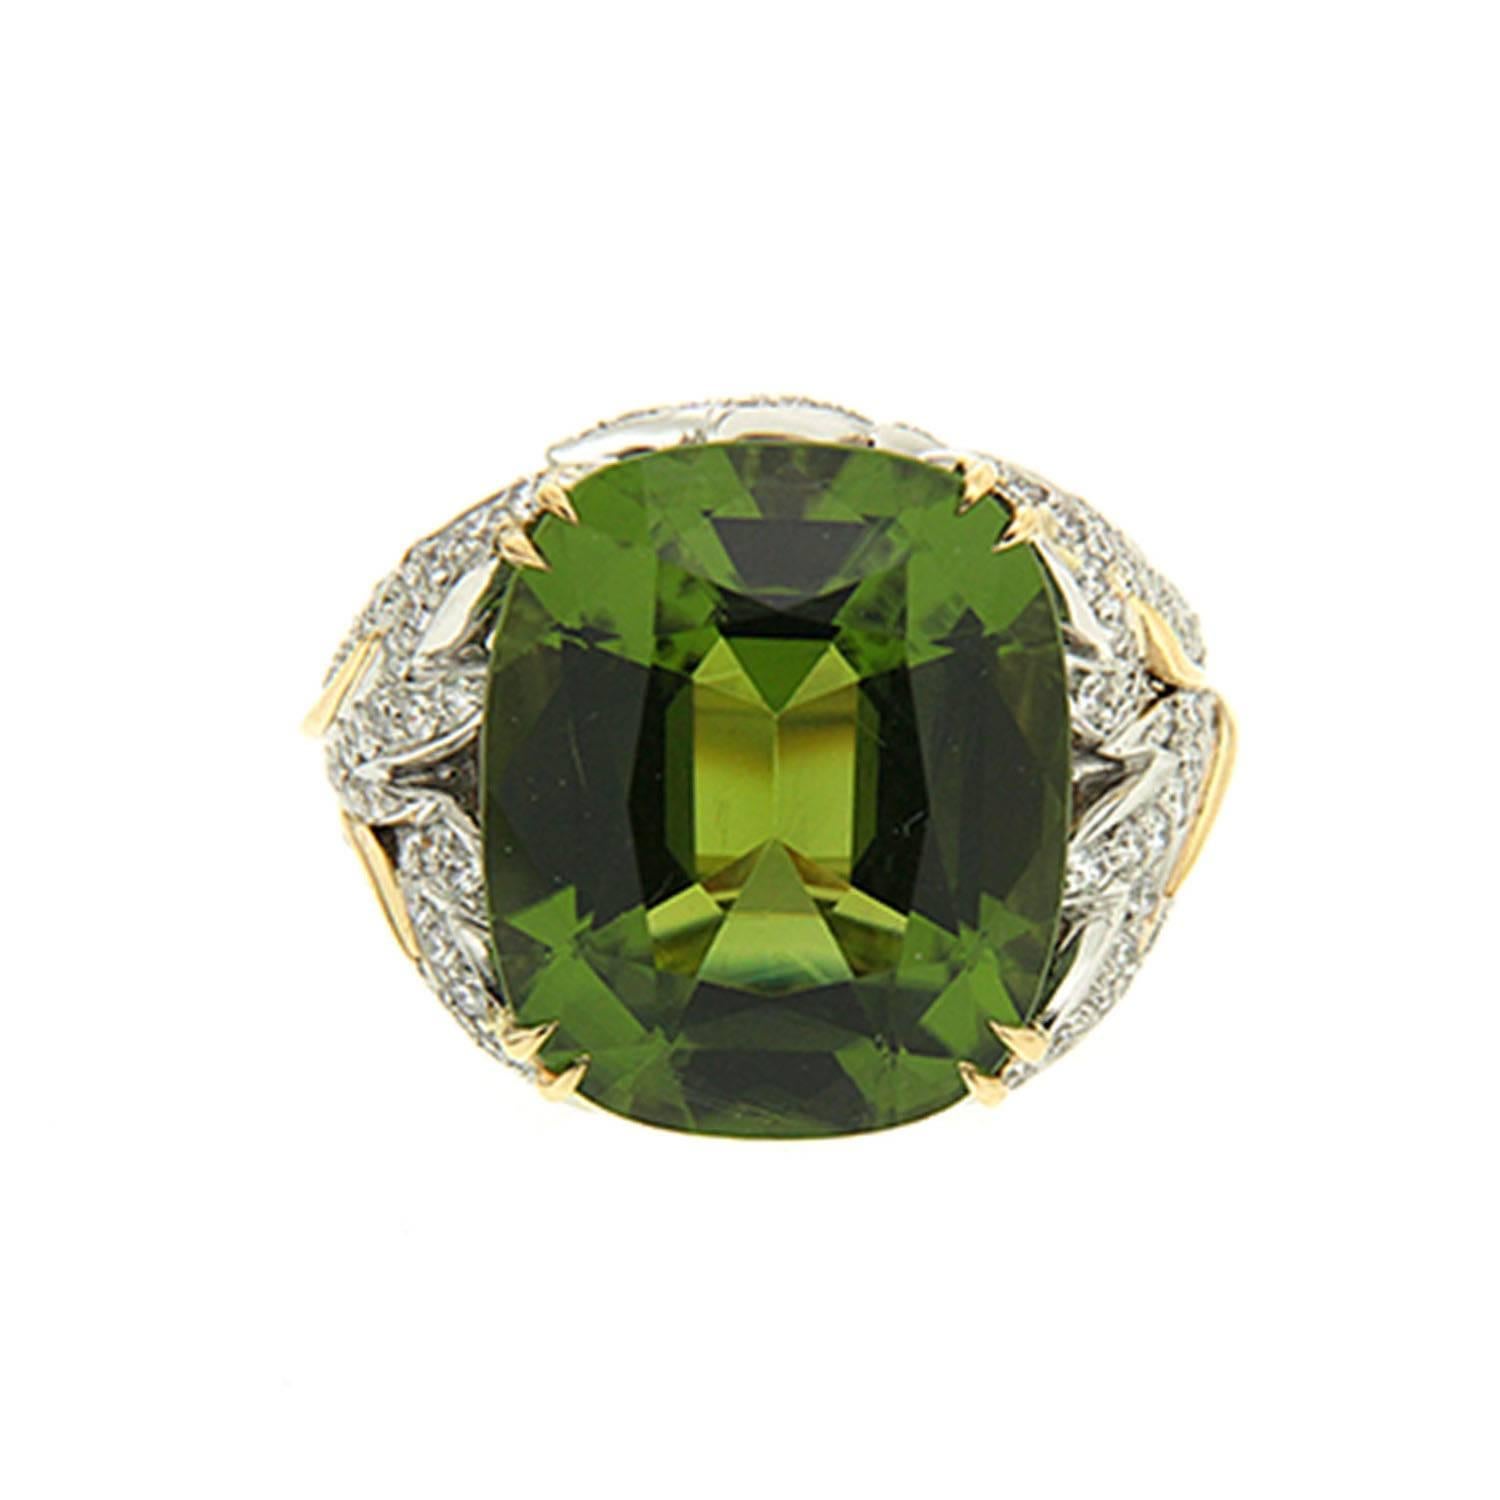 This ring features a Cushion Peridot 18.39ct with diamond pave leafs on the side. The ring is finished in 18kt yellow gold.